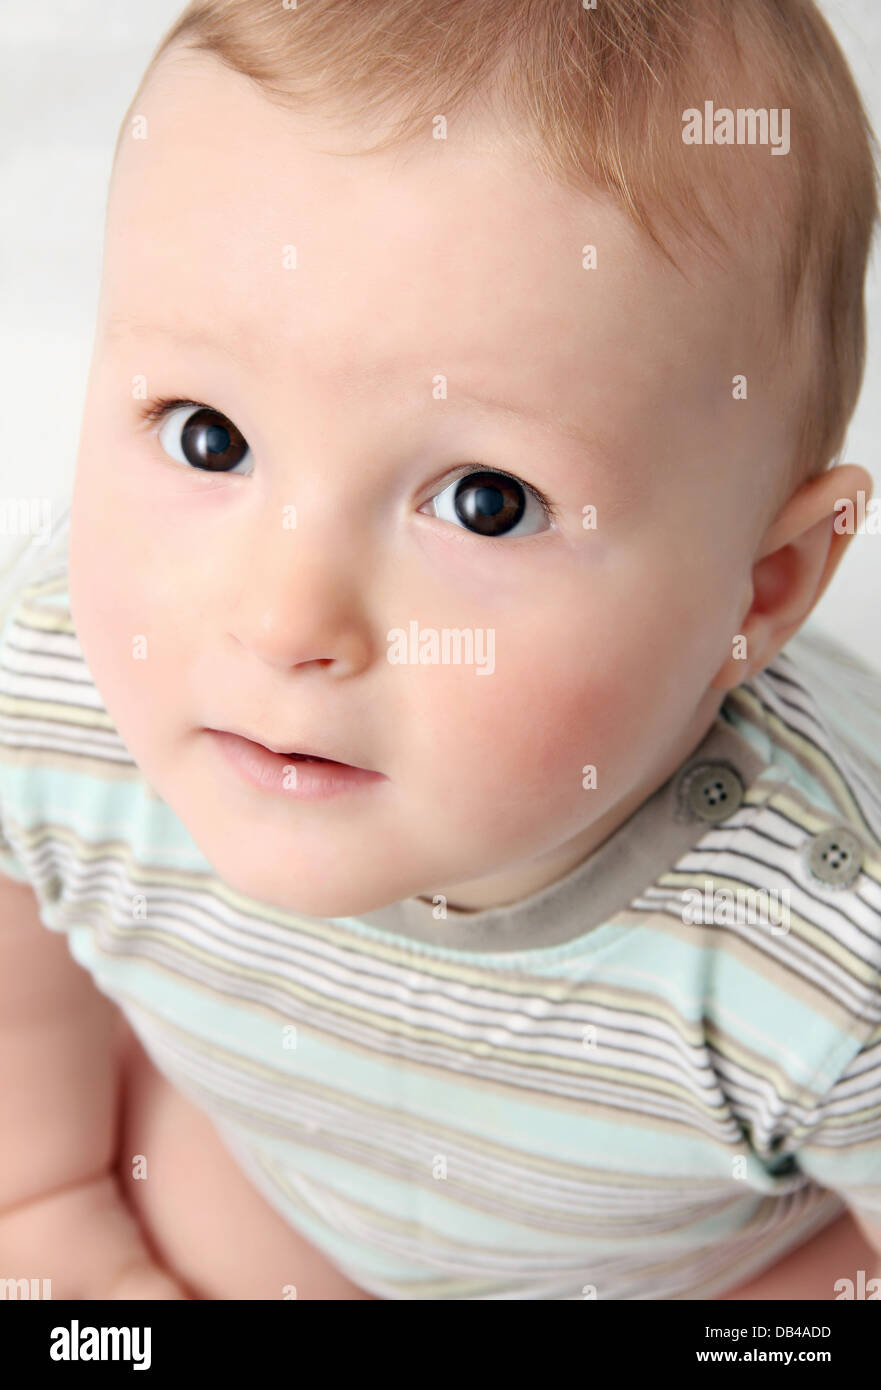 beautiful baby looking up Stock Photo